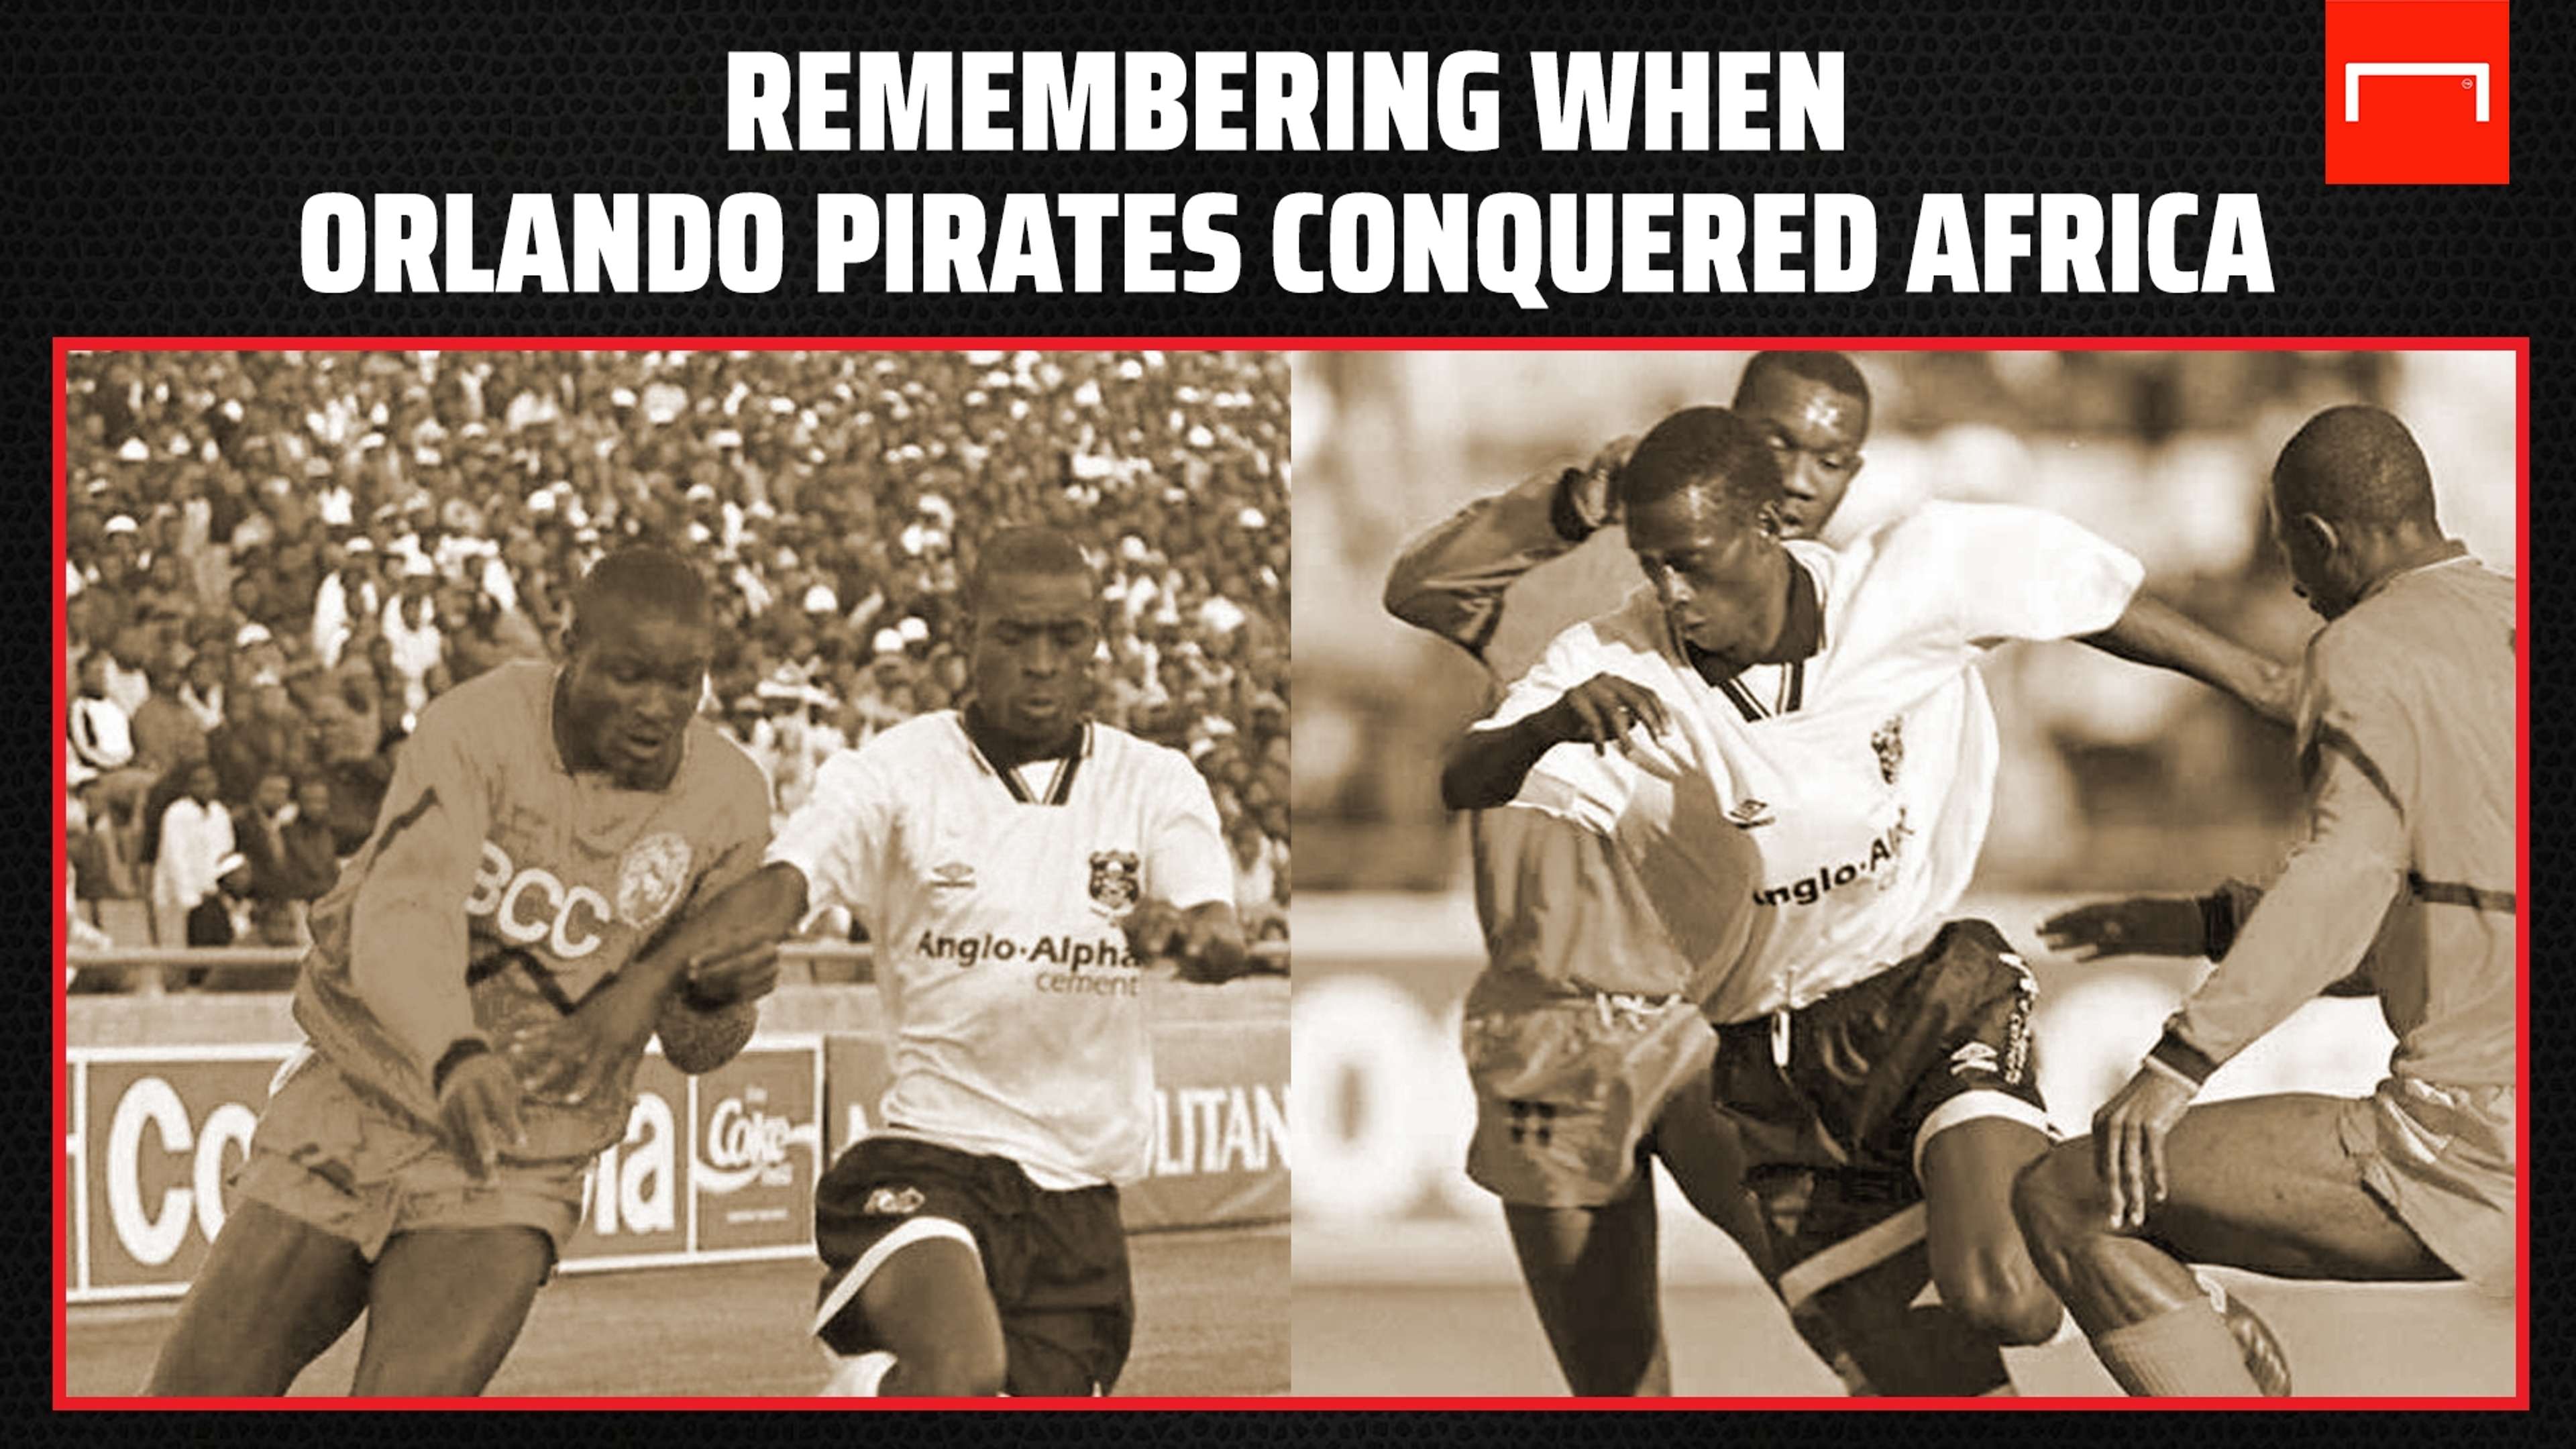 Remembering when Orlando Pirates conquered Africa